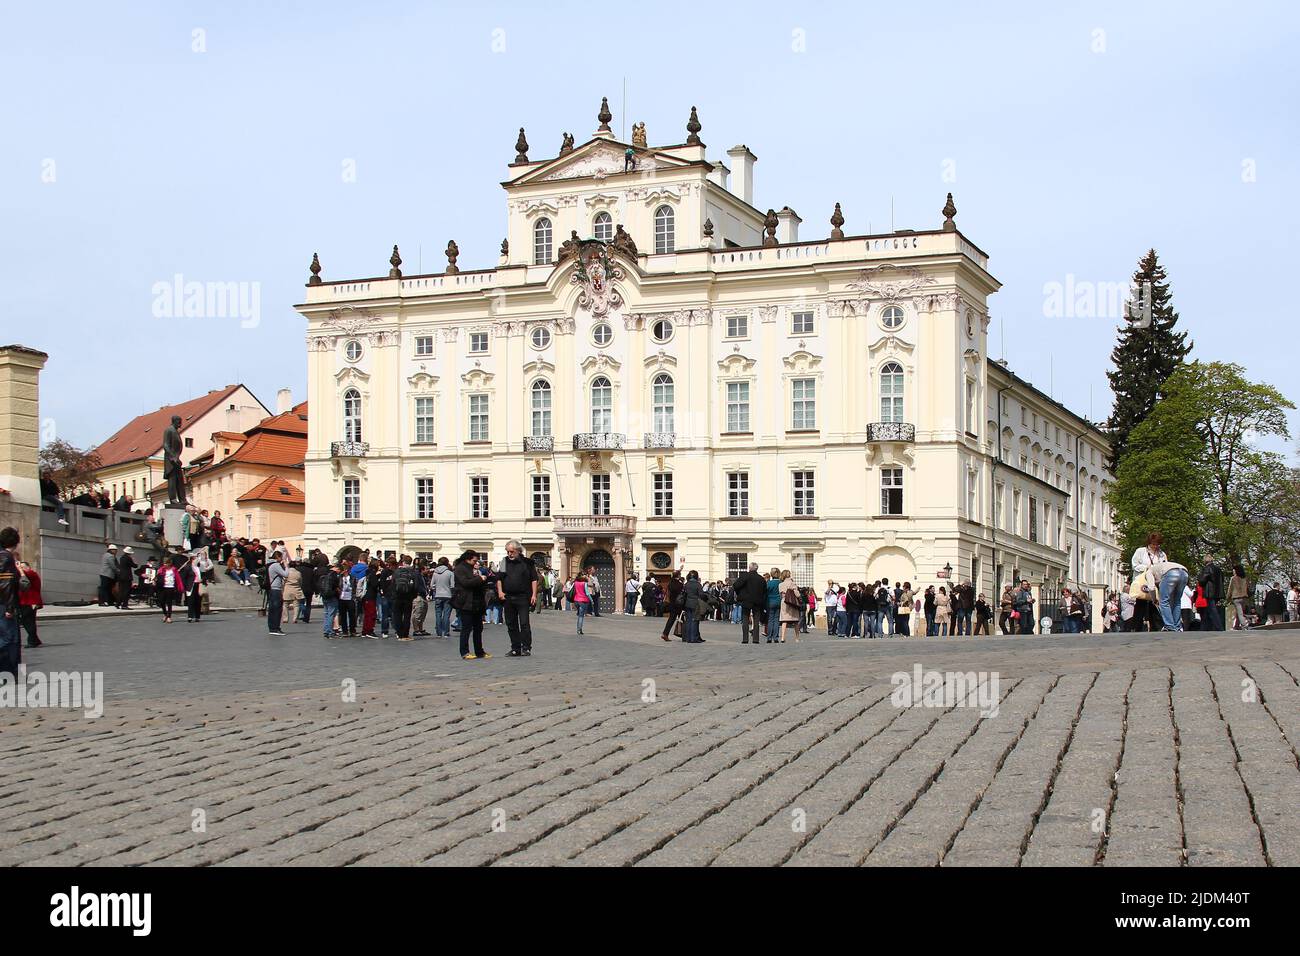 PRAGUE, CZECH - APRIL 24, 2012: This is the Archbishop's Palace on Hradcany Square, the residence of the Archbishop of the city. Stock Photo